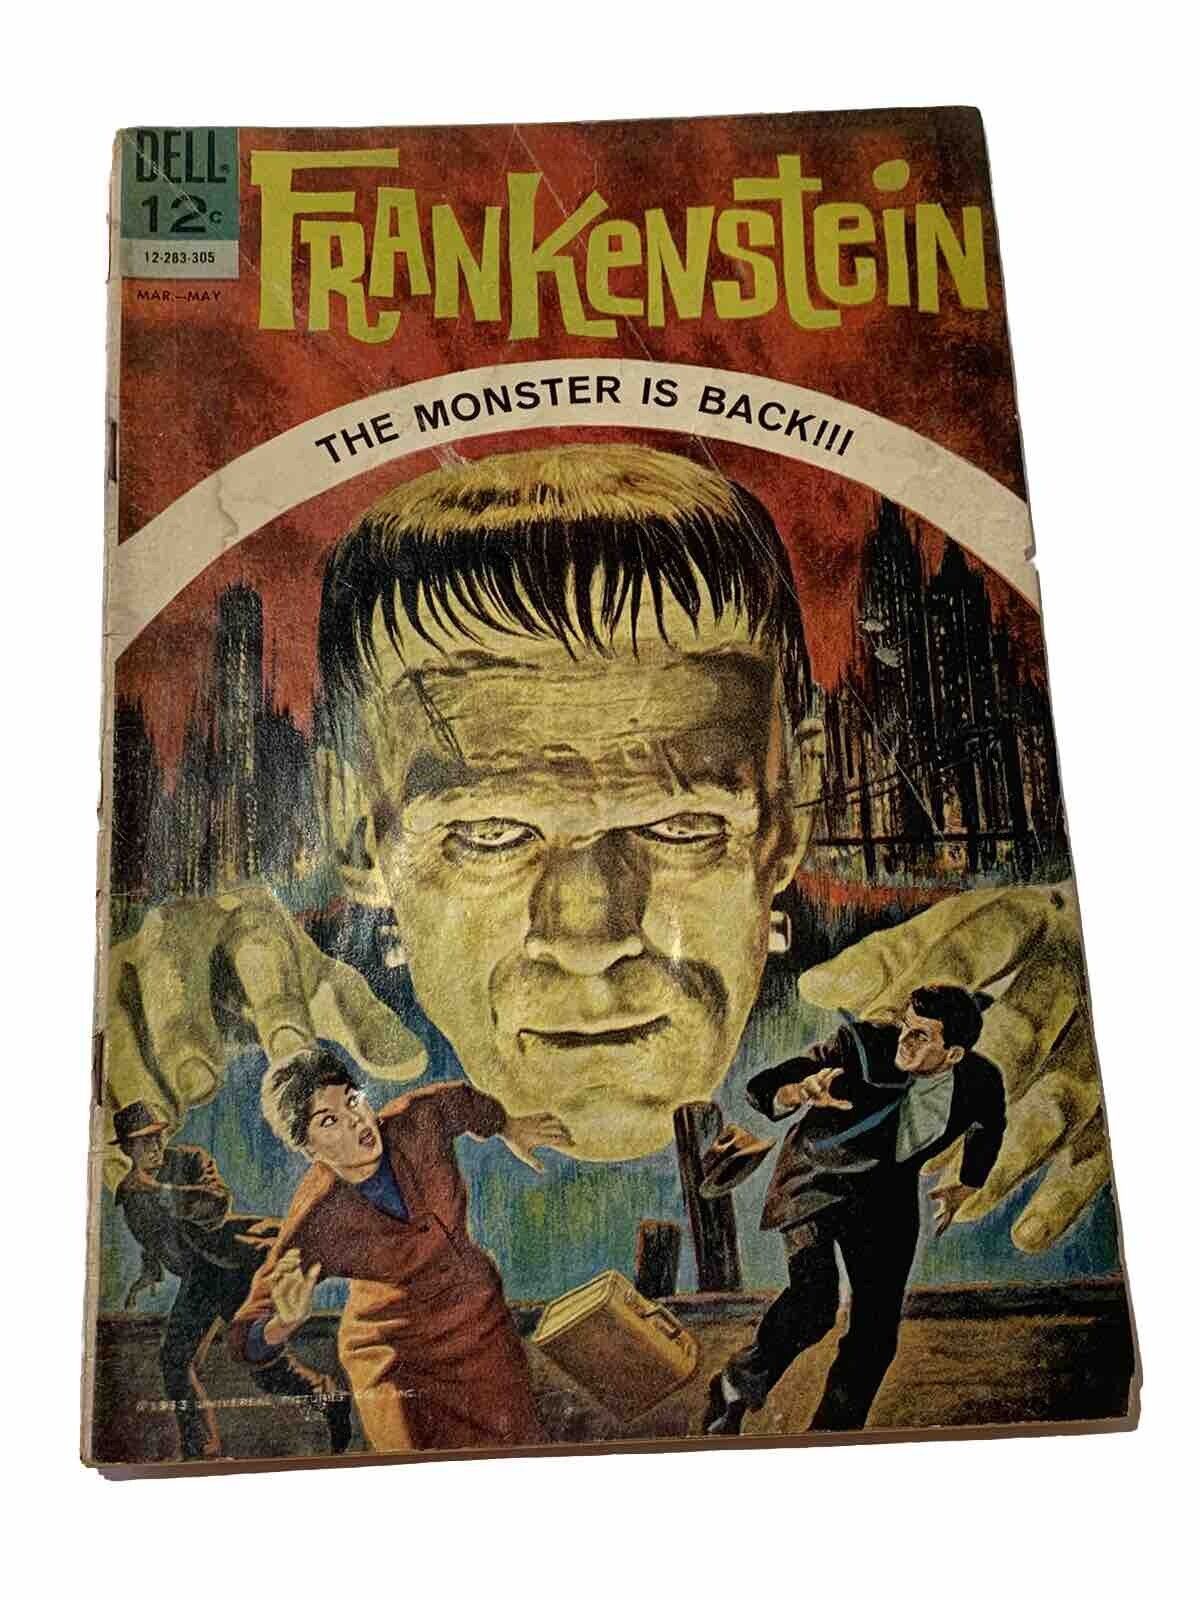 FRANKENSTEIN #1 (1963) Dell 1st Print The Monster Is Back RARE First Printing VG